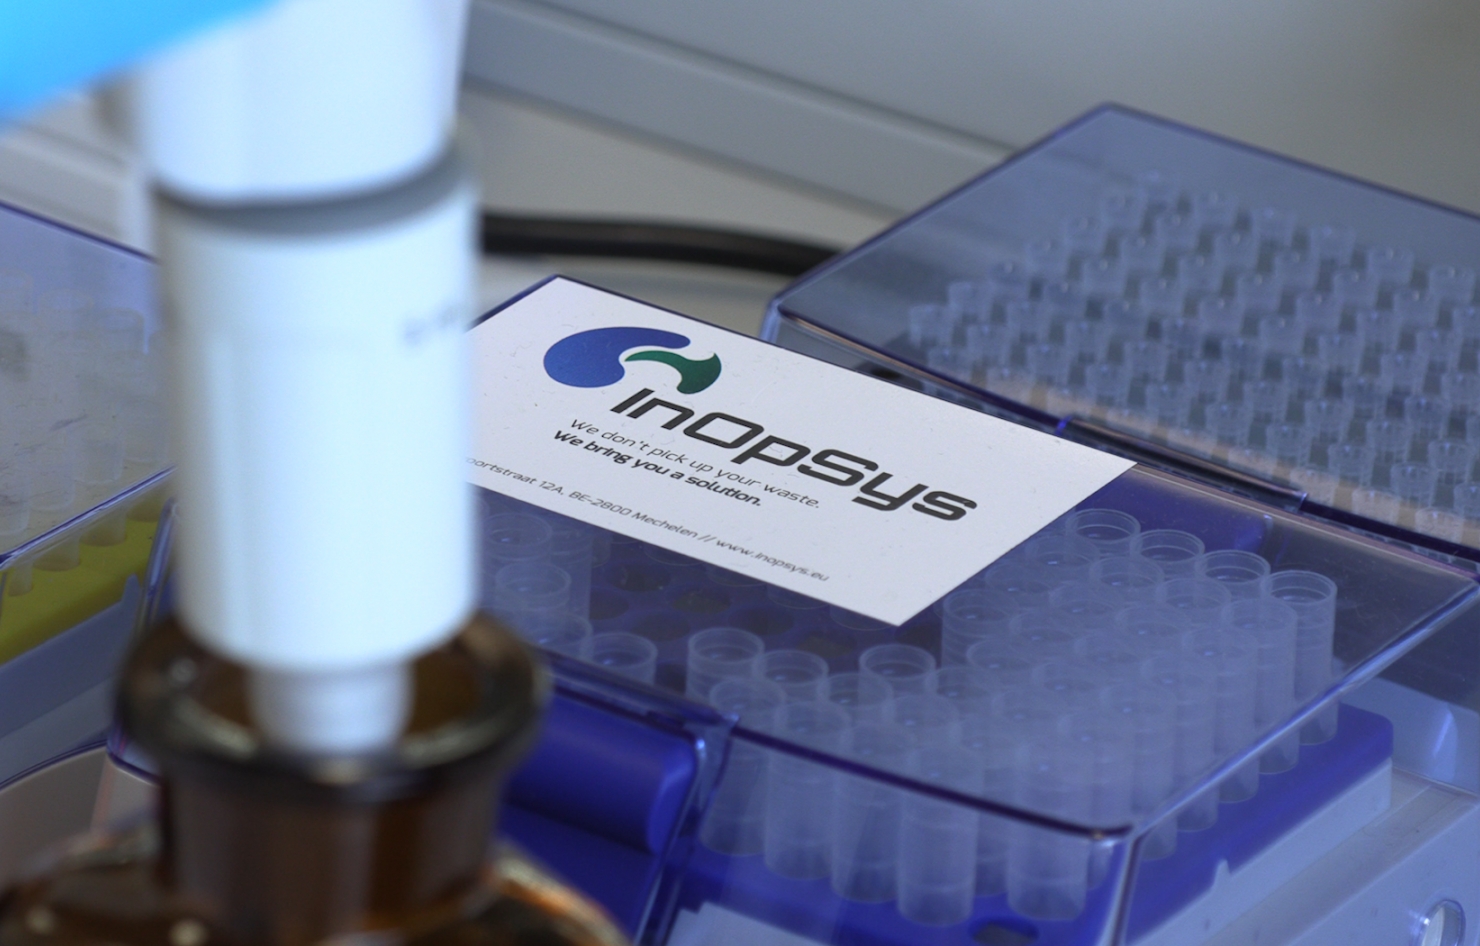 Inopsys develops innovative solution to purify water from PFAS